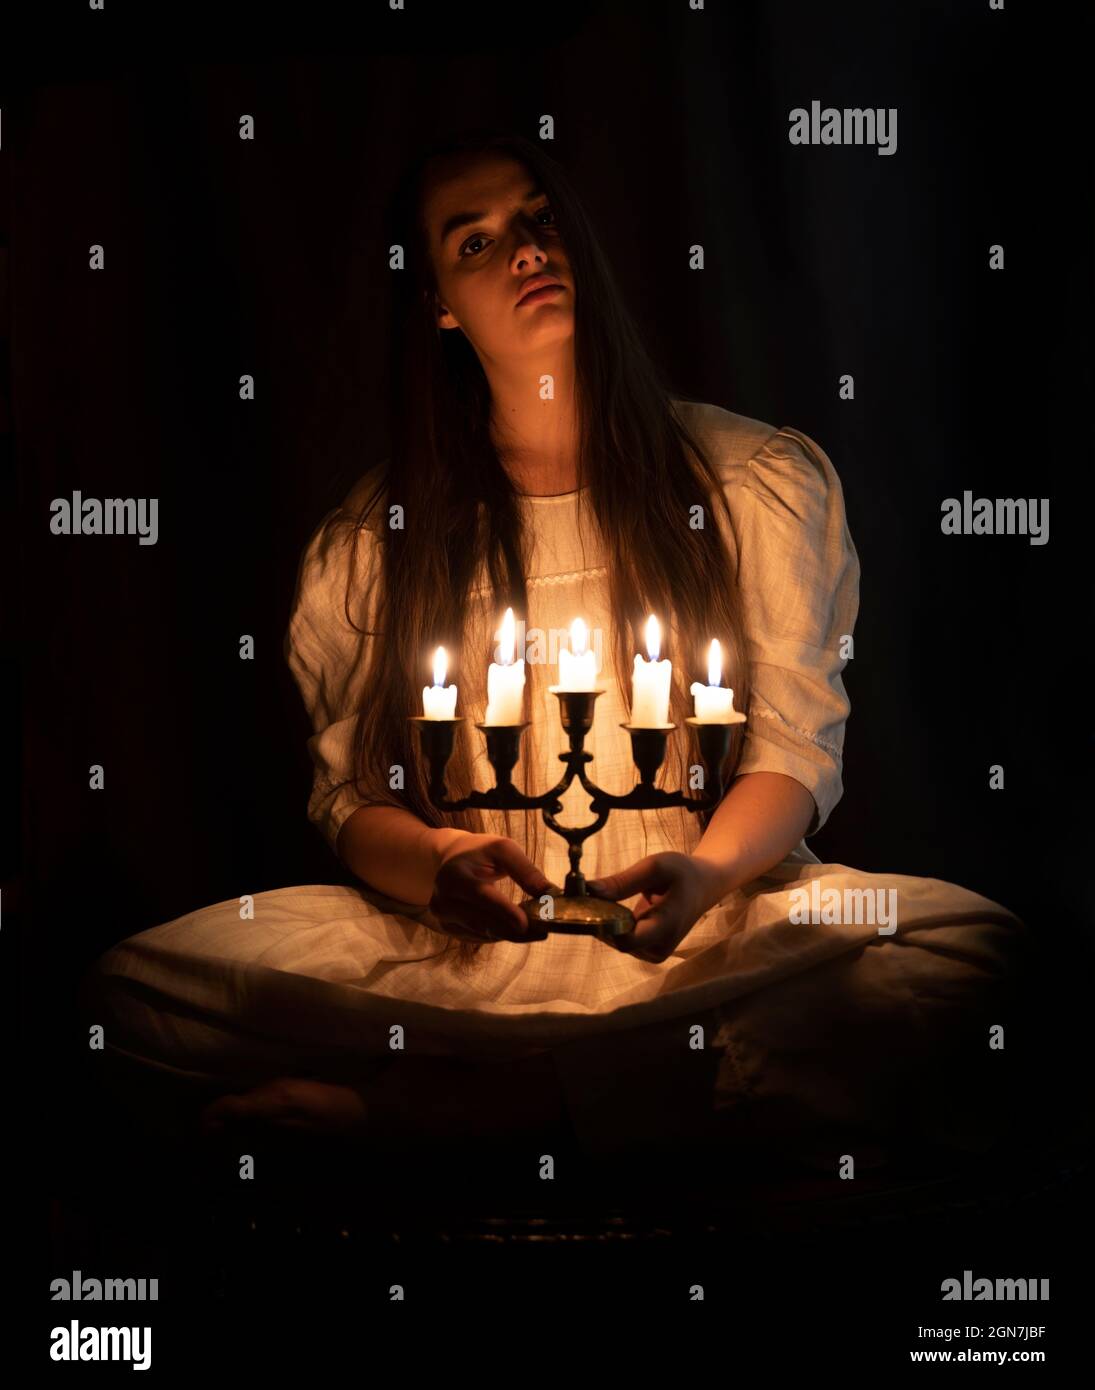 A young girl in an old white dress sitting and holding a candleabra in her hands. Dark background. Scary horror concept. Stock Photo